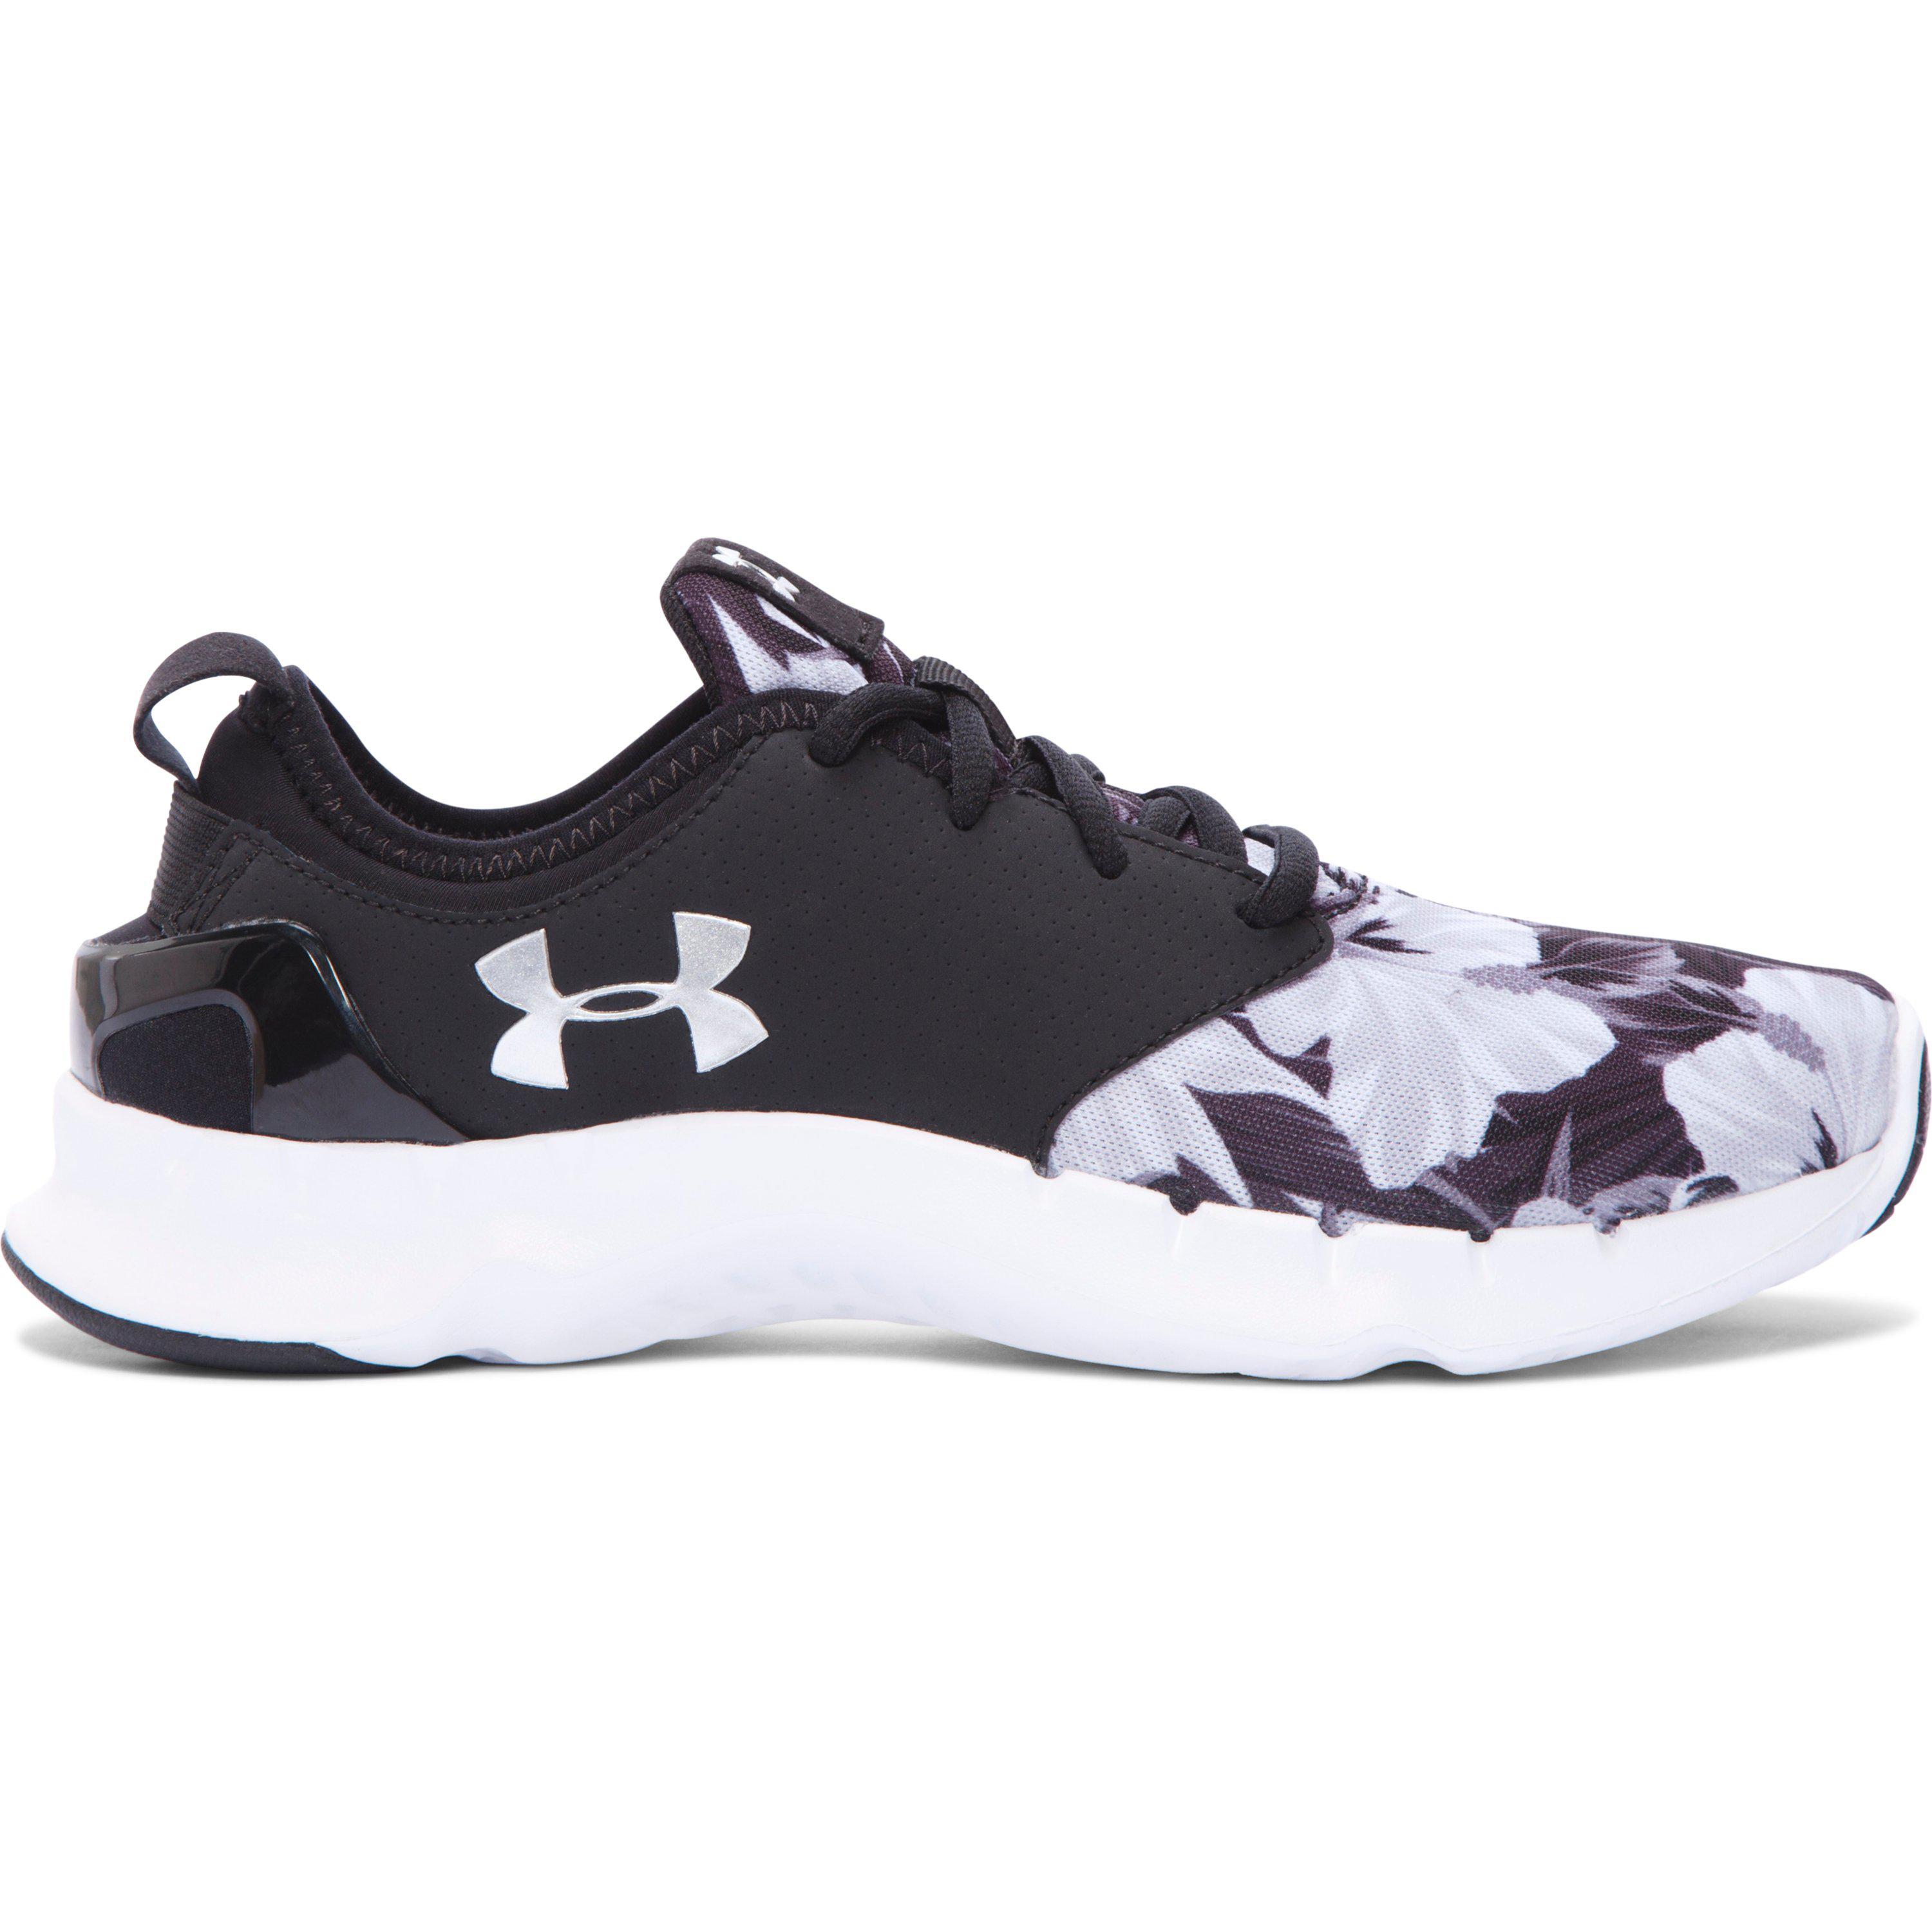 Under Armour Women's Ua Flow Floral Running Shoes in Black | Lyst